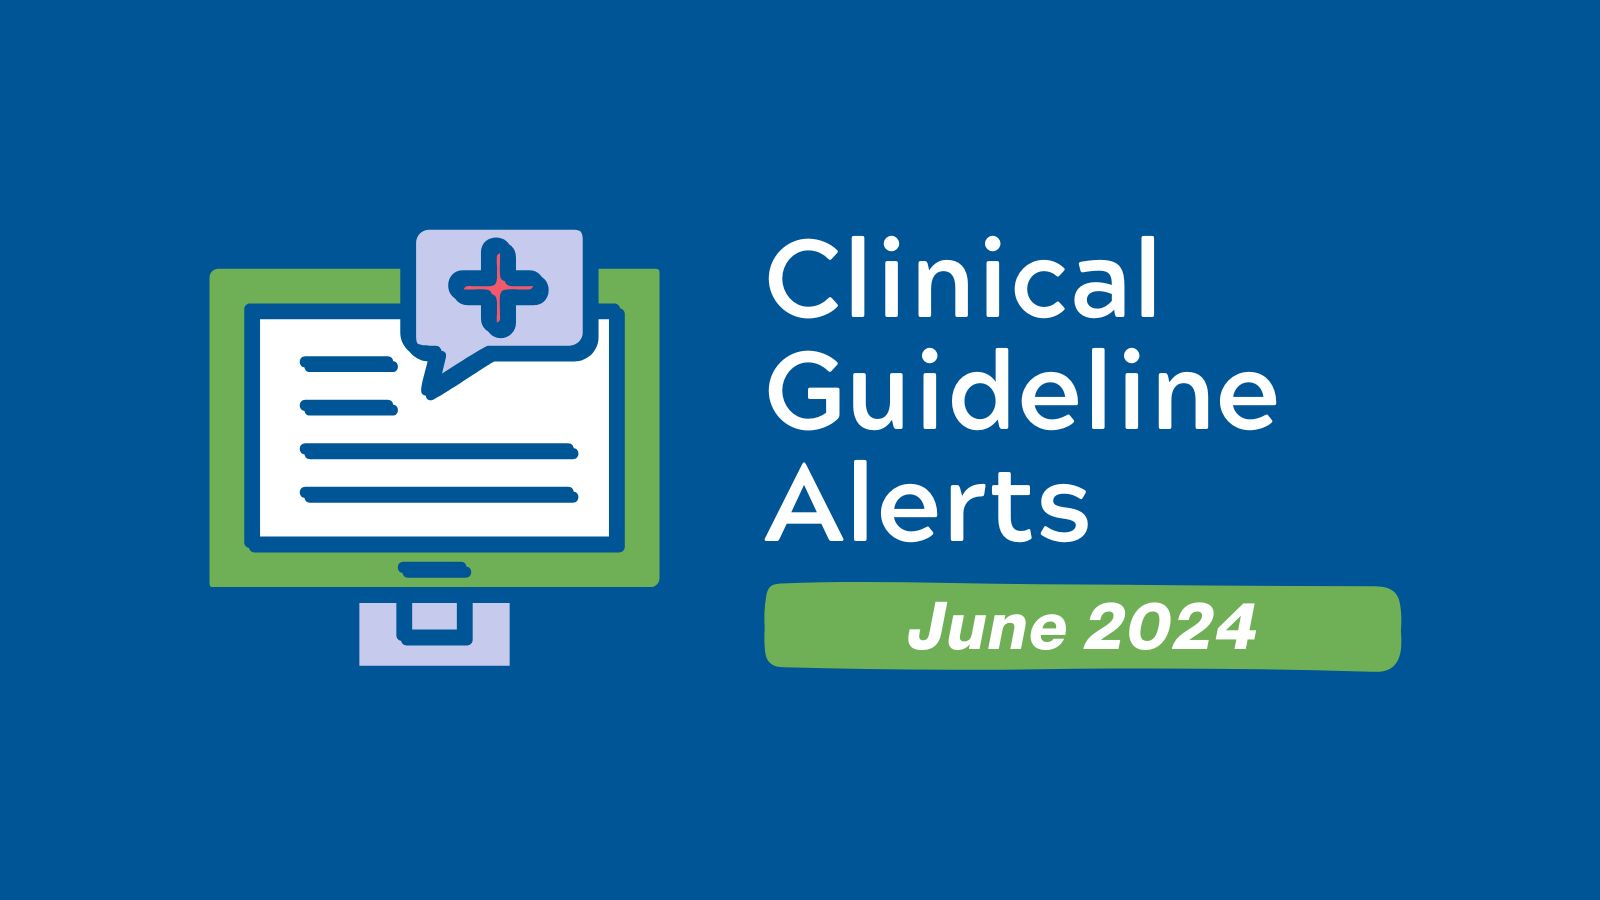 Clinical Guideline Alerts June 2024